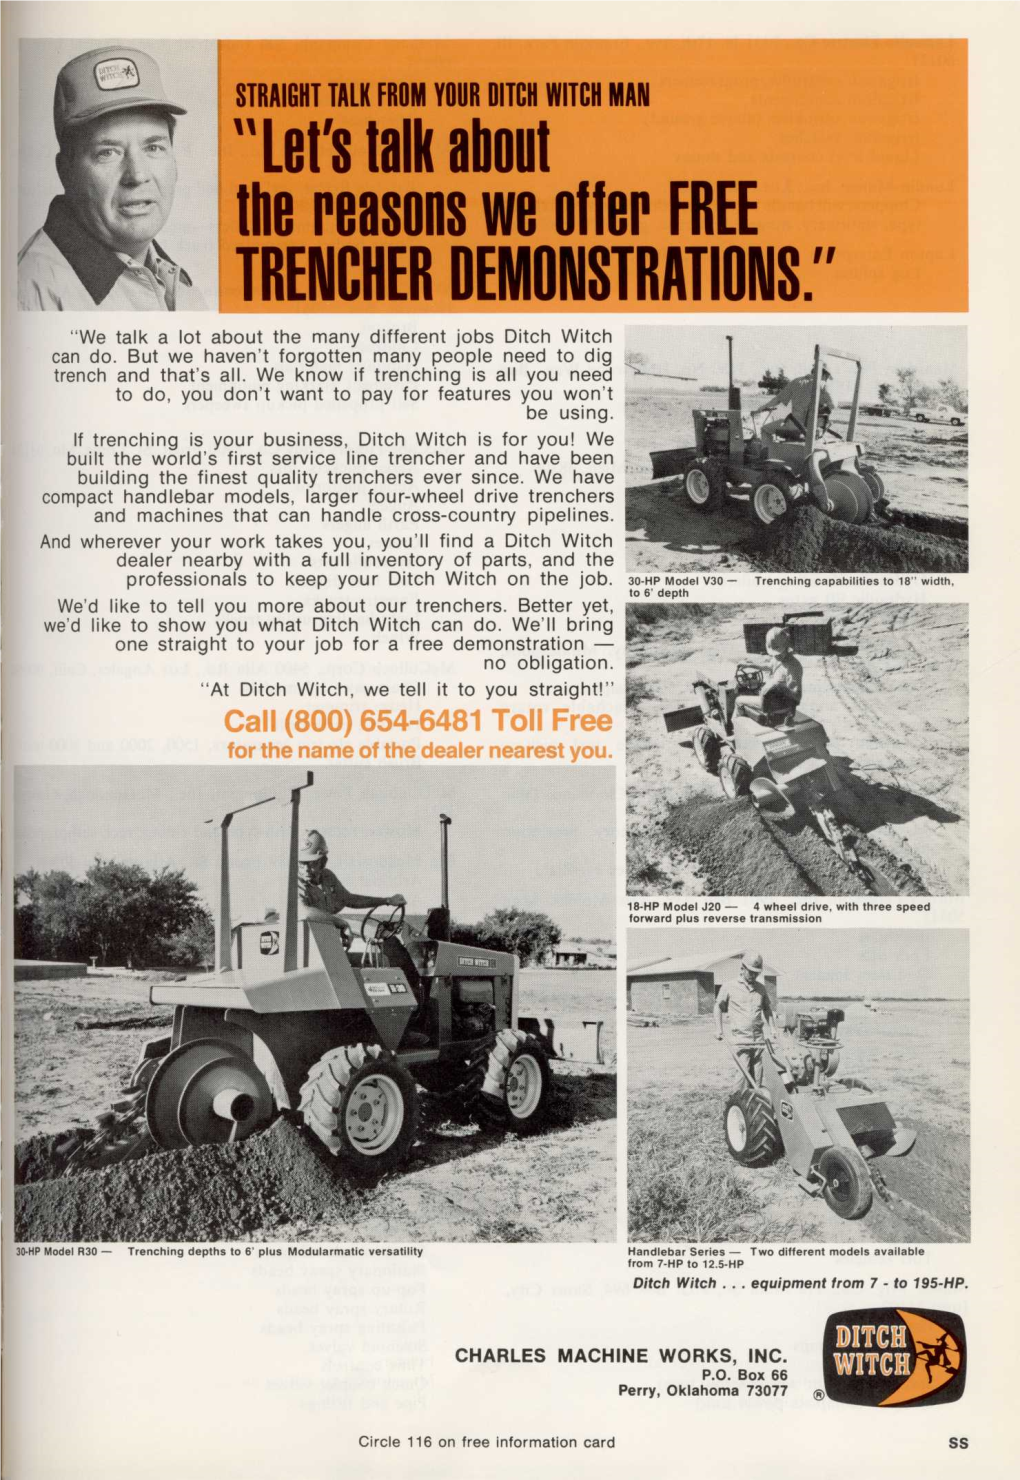 "Let's Talk About the Reasons We Offer FREE TRENCHER DEMONSTRATIONS